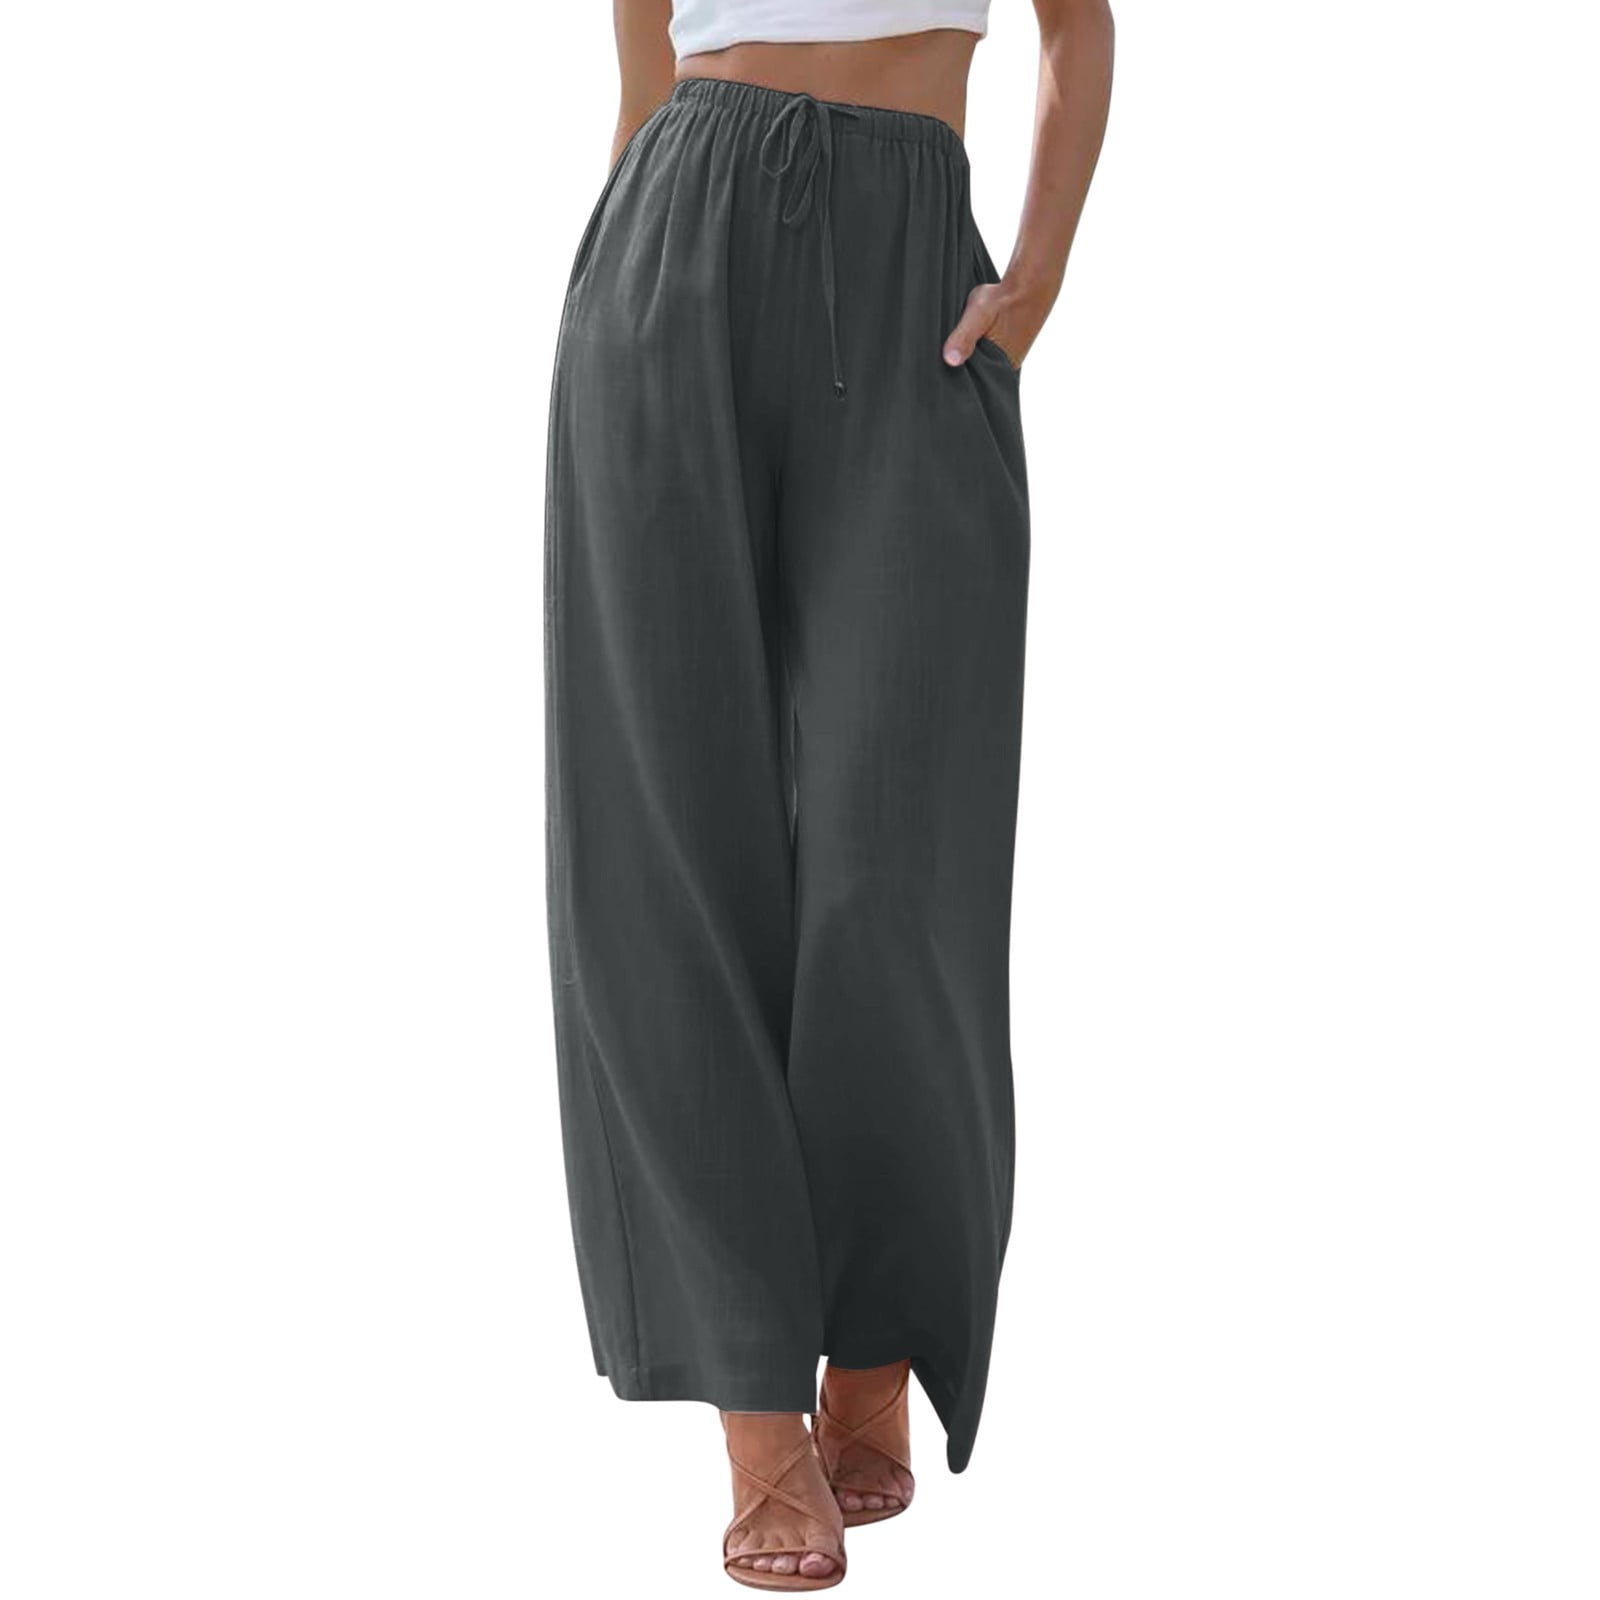 Youmylove Women Pants Trousers High Waist Wide Leg Pants Fashion Drawstring Elastic  Trousers Comfy Straight Leg Long Pants With Pockets Trend Workout Running  Lounge Clothes 